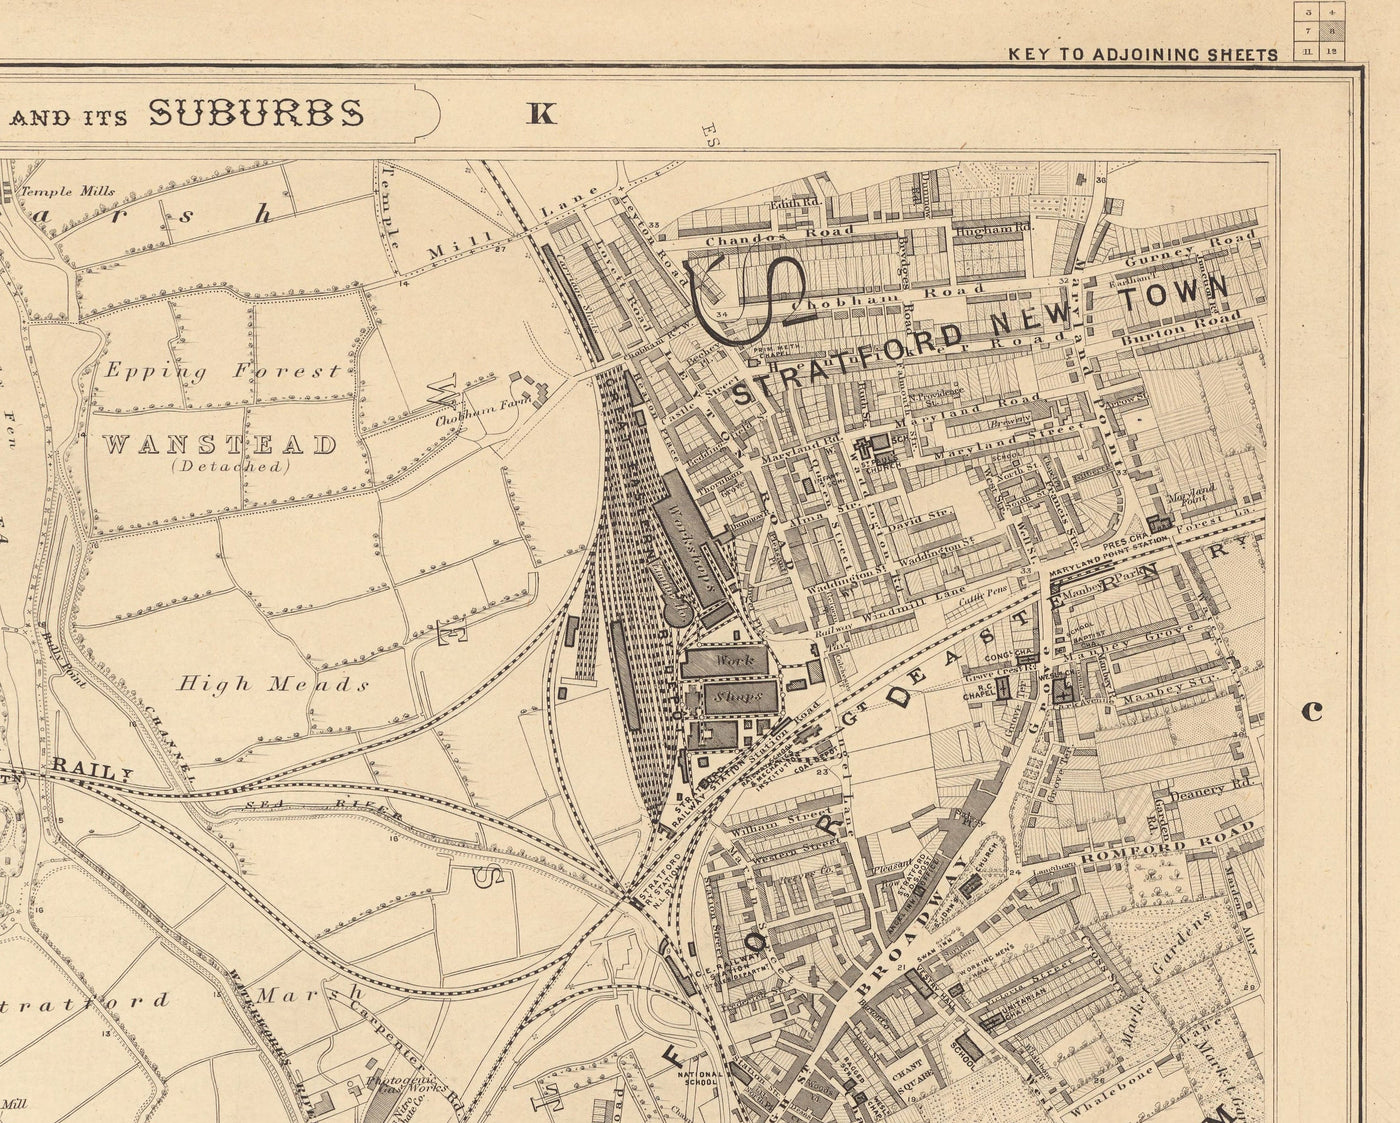 Old Map of East London in 1862 by Edward Stanford - Victoria Park, Hackney, Bow, Stratford, Tower Hamlets - E9, E20, E3, E15